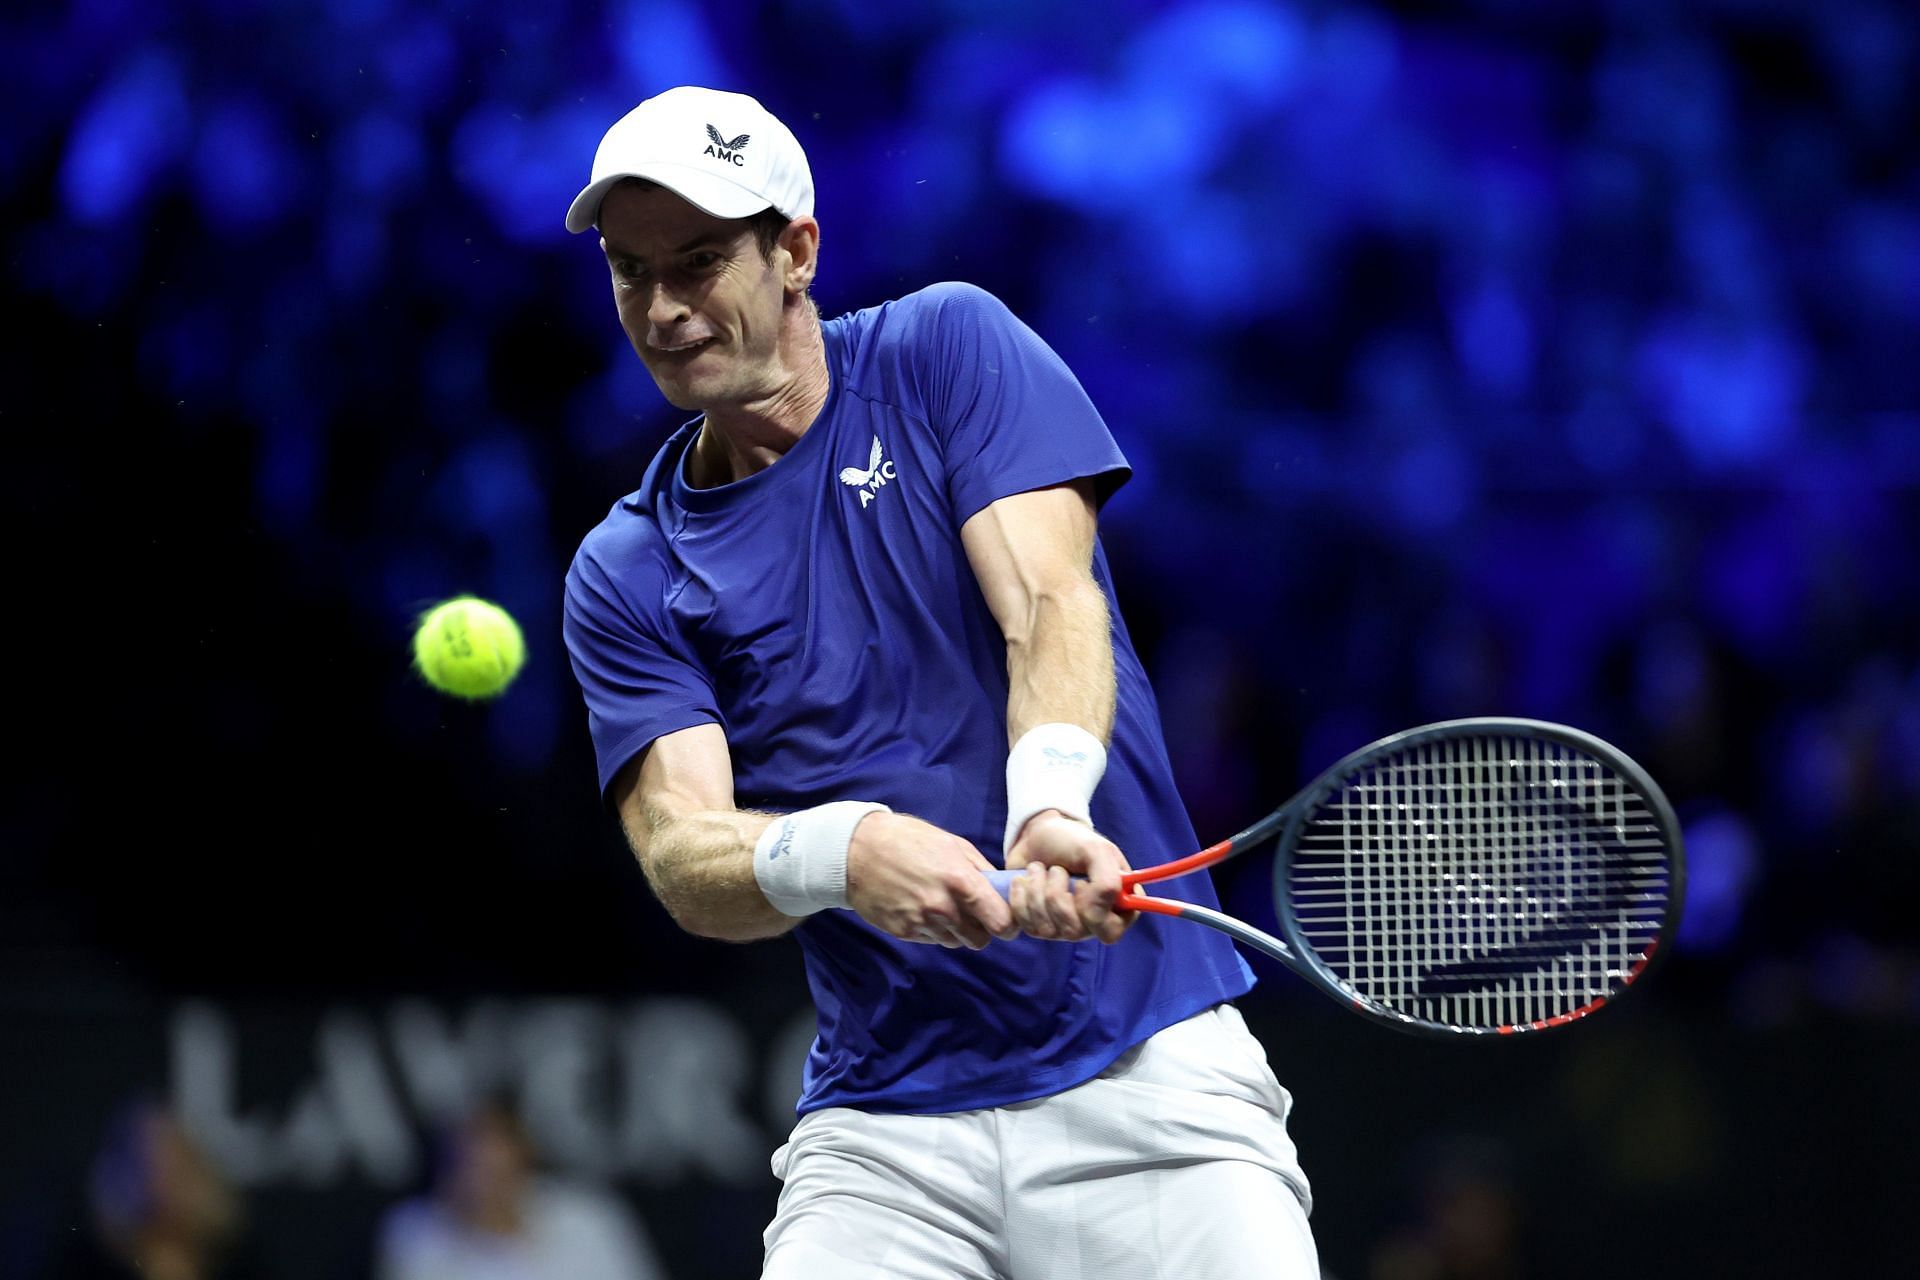 Andy Murray received a wildcard for the main draw of the Gijon Open